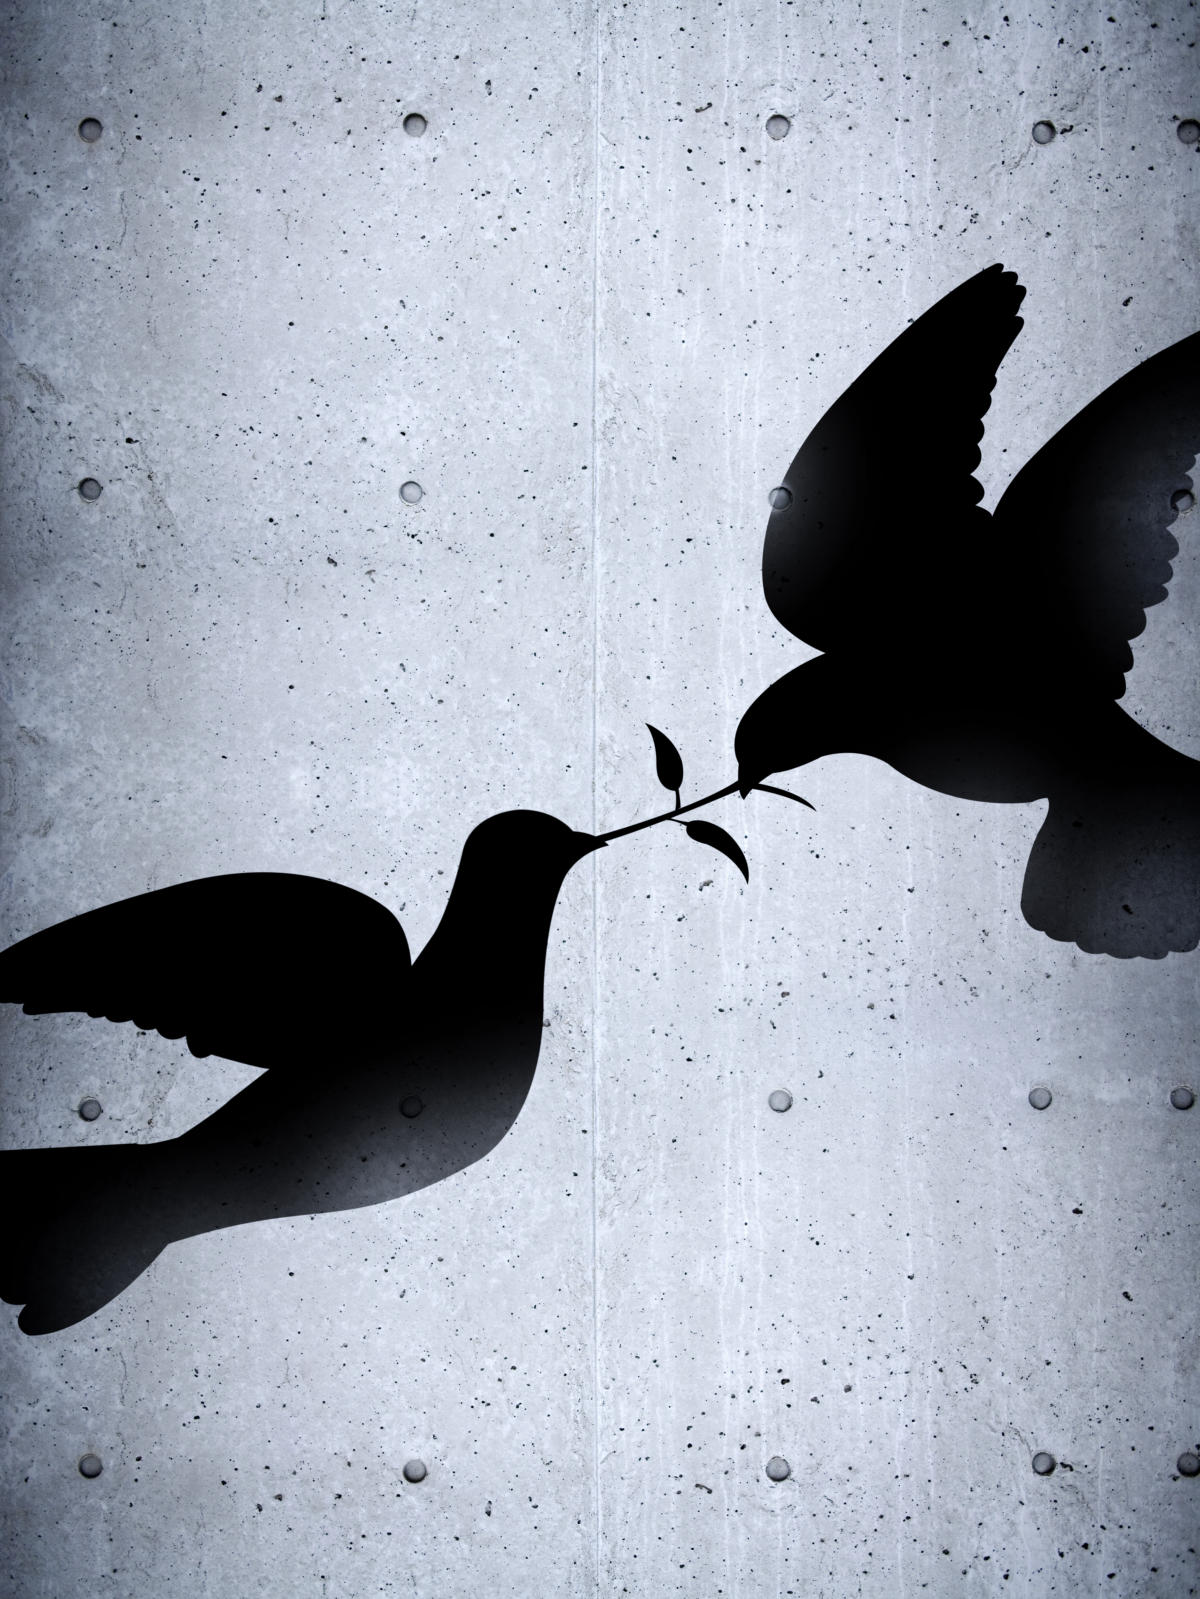 birds fighting on concrete wall 148149885